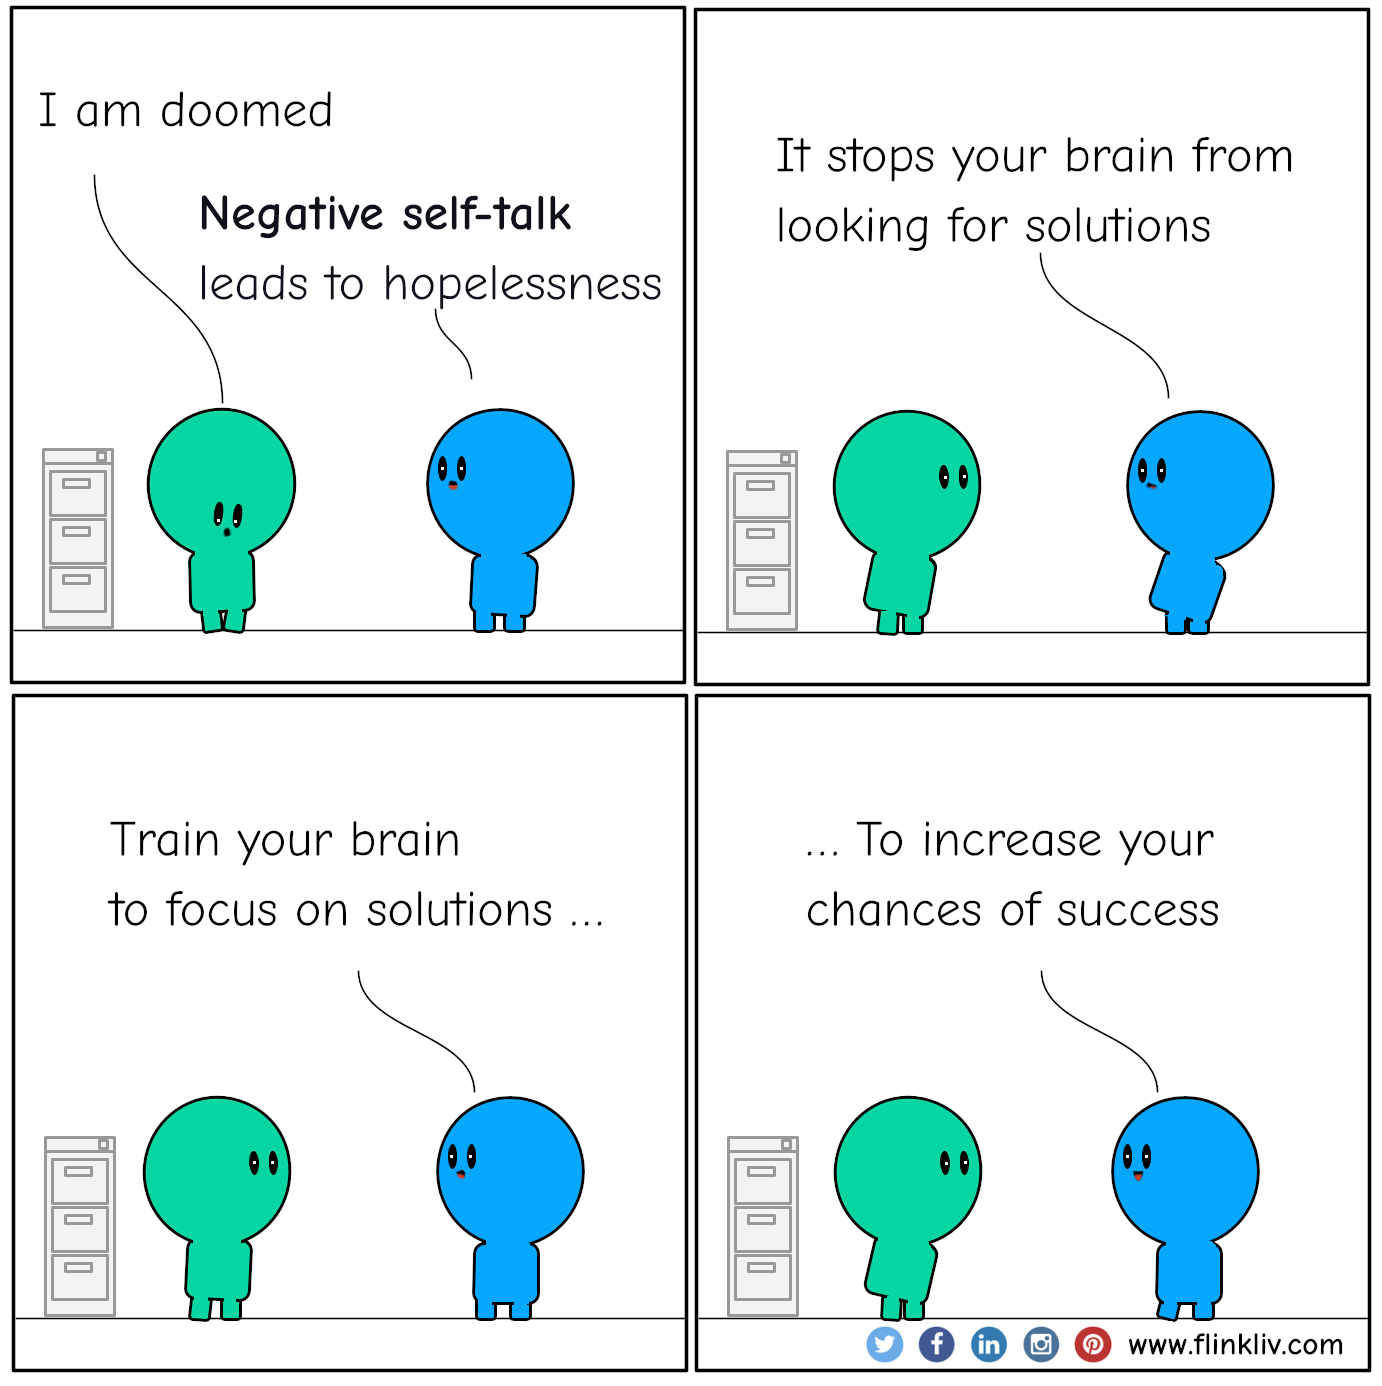 Conversation between A and B about avoiding negative self-talk. A: I am doomed. B: Negative self-talk leads to hopelessness B: Negative self-talk stops your brain from looking for solutions. B: Train your brain to focus on solutions to increase your chances of success. By flinkliv.com